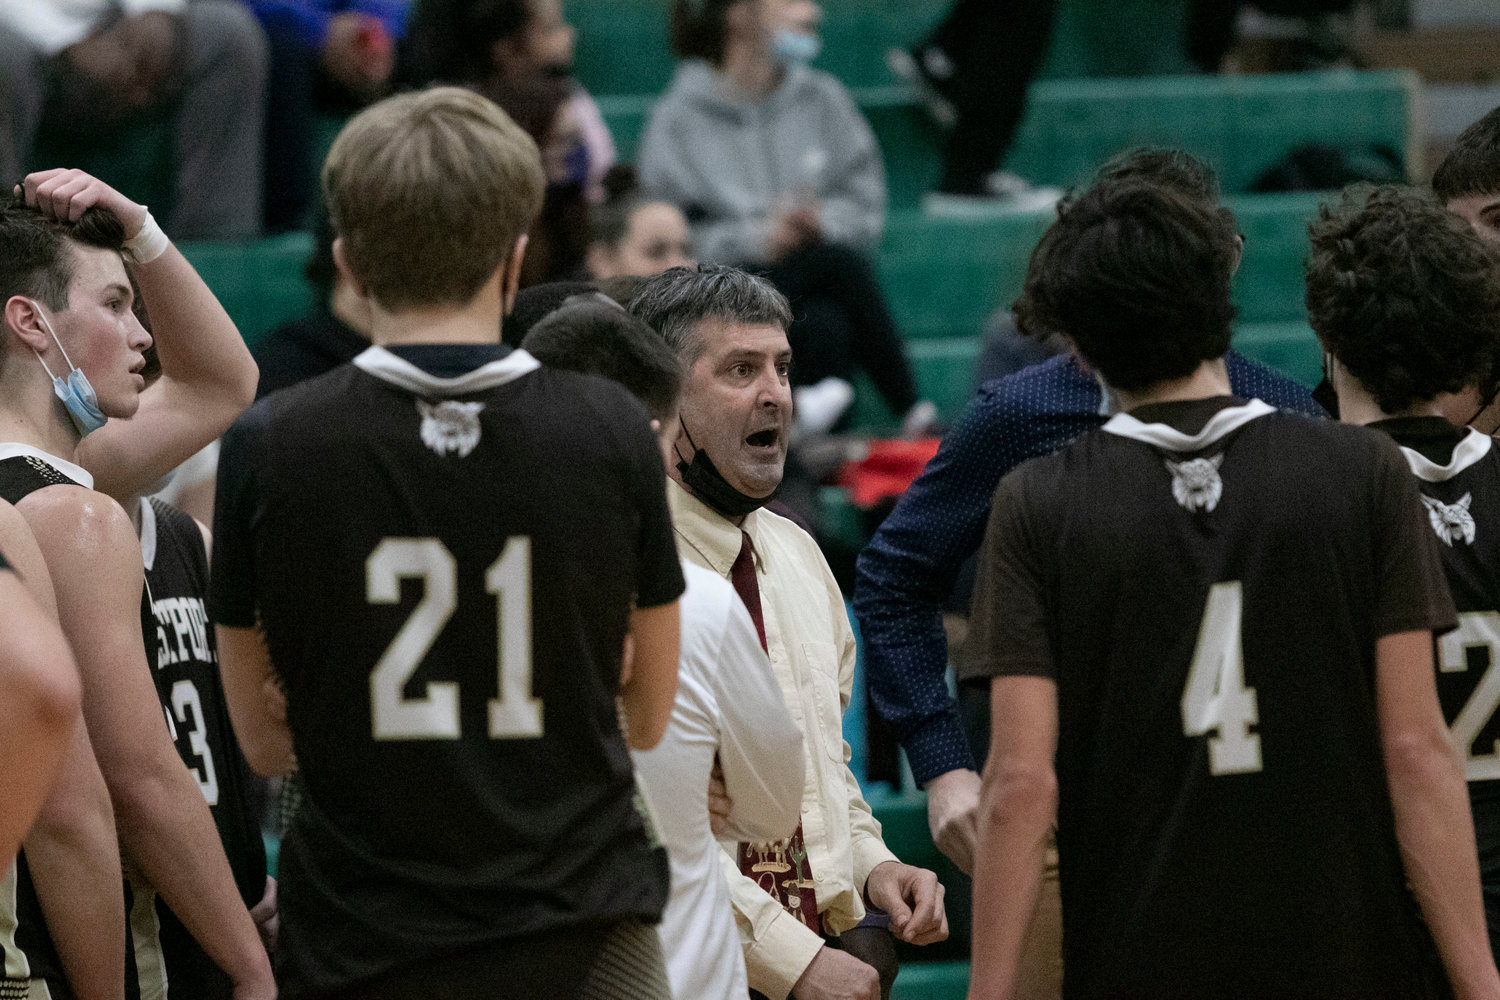 Head coach Scot Boudria speaks to his team during their Sweet 16 loss to Paulo Freire last season. He said that “The sky is the limit,” for this year’s Wildcats as they begin the 2022-23 season with scrimmage games this week.